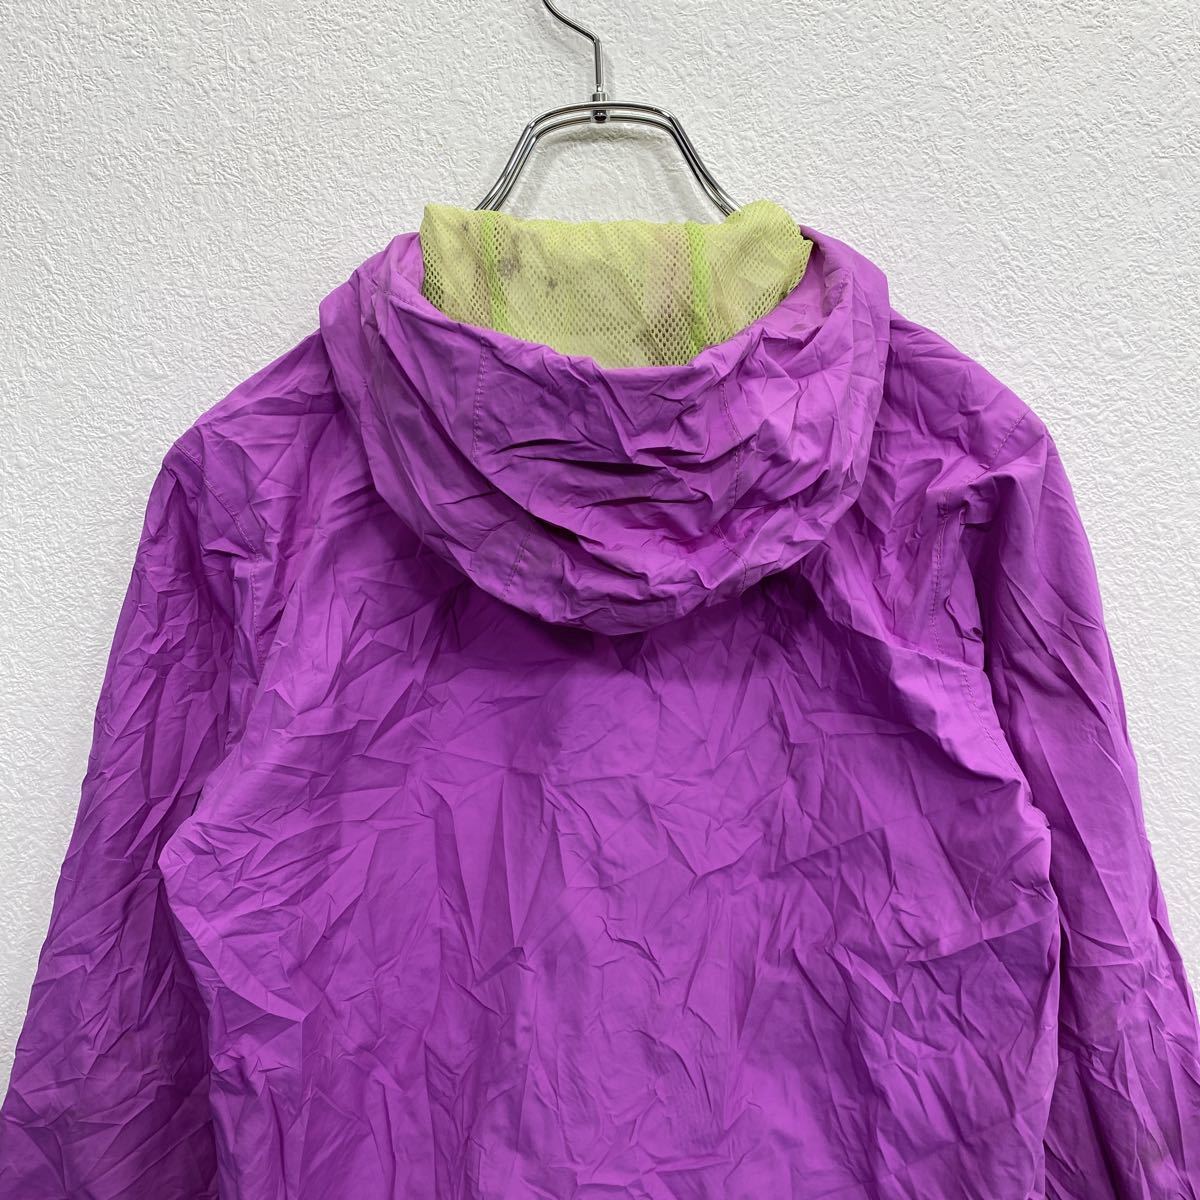 THE NORTH FACE mountain parka Kids M purple North Face nylon outdoor for children old clothes . America buying up t2201-4018